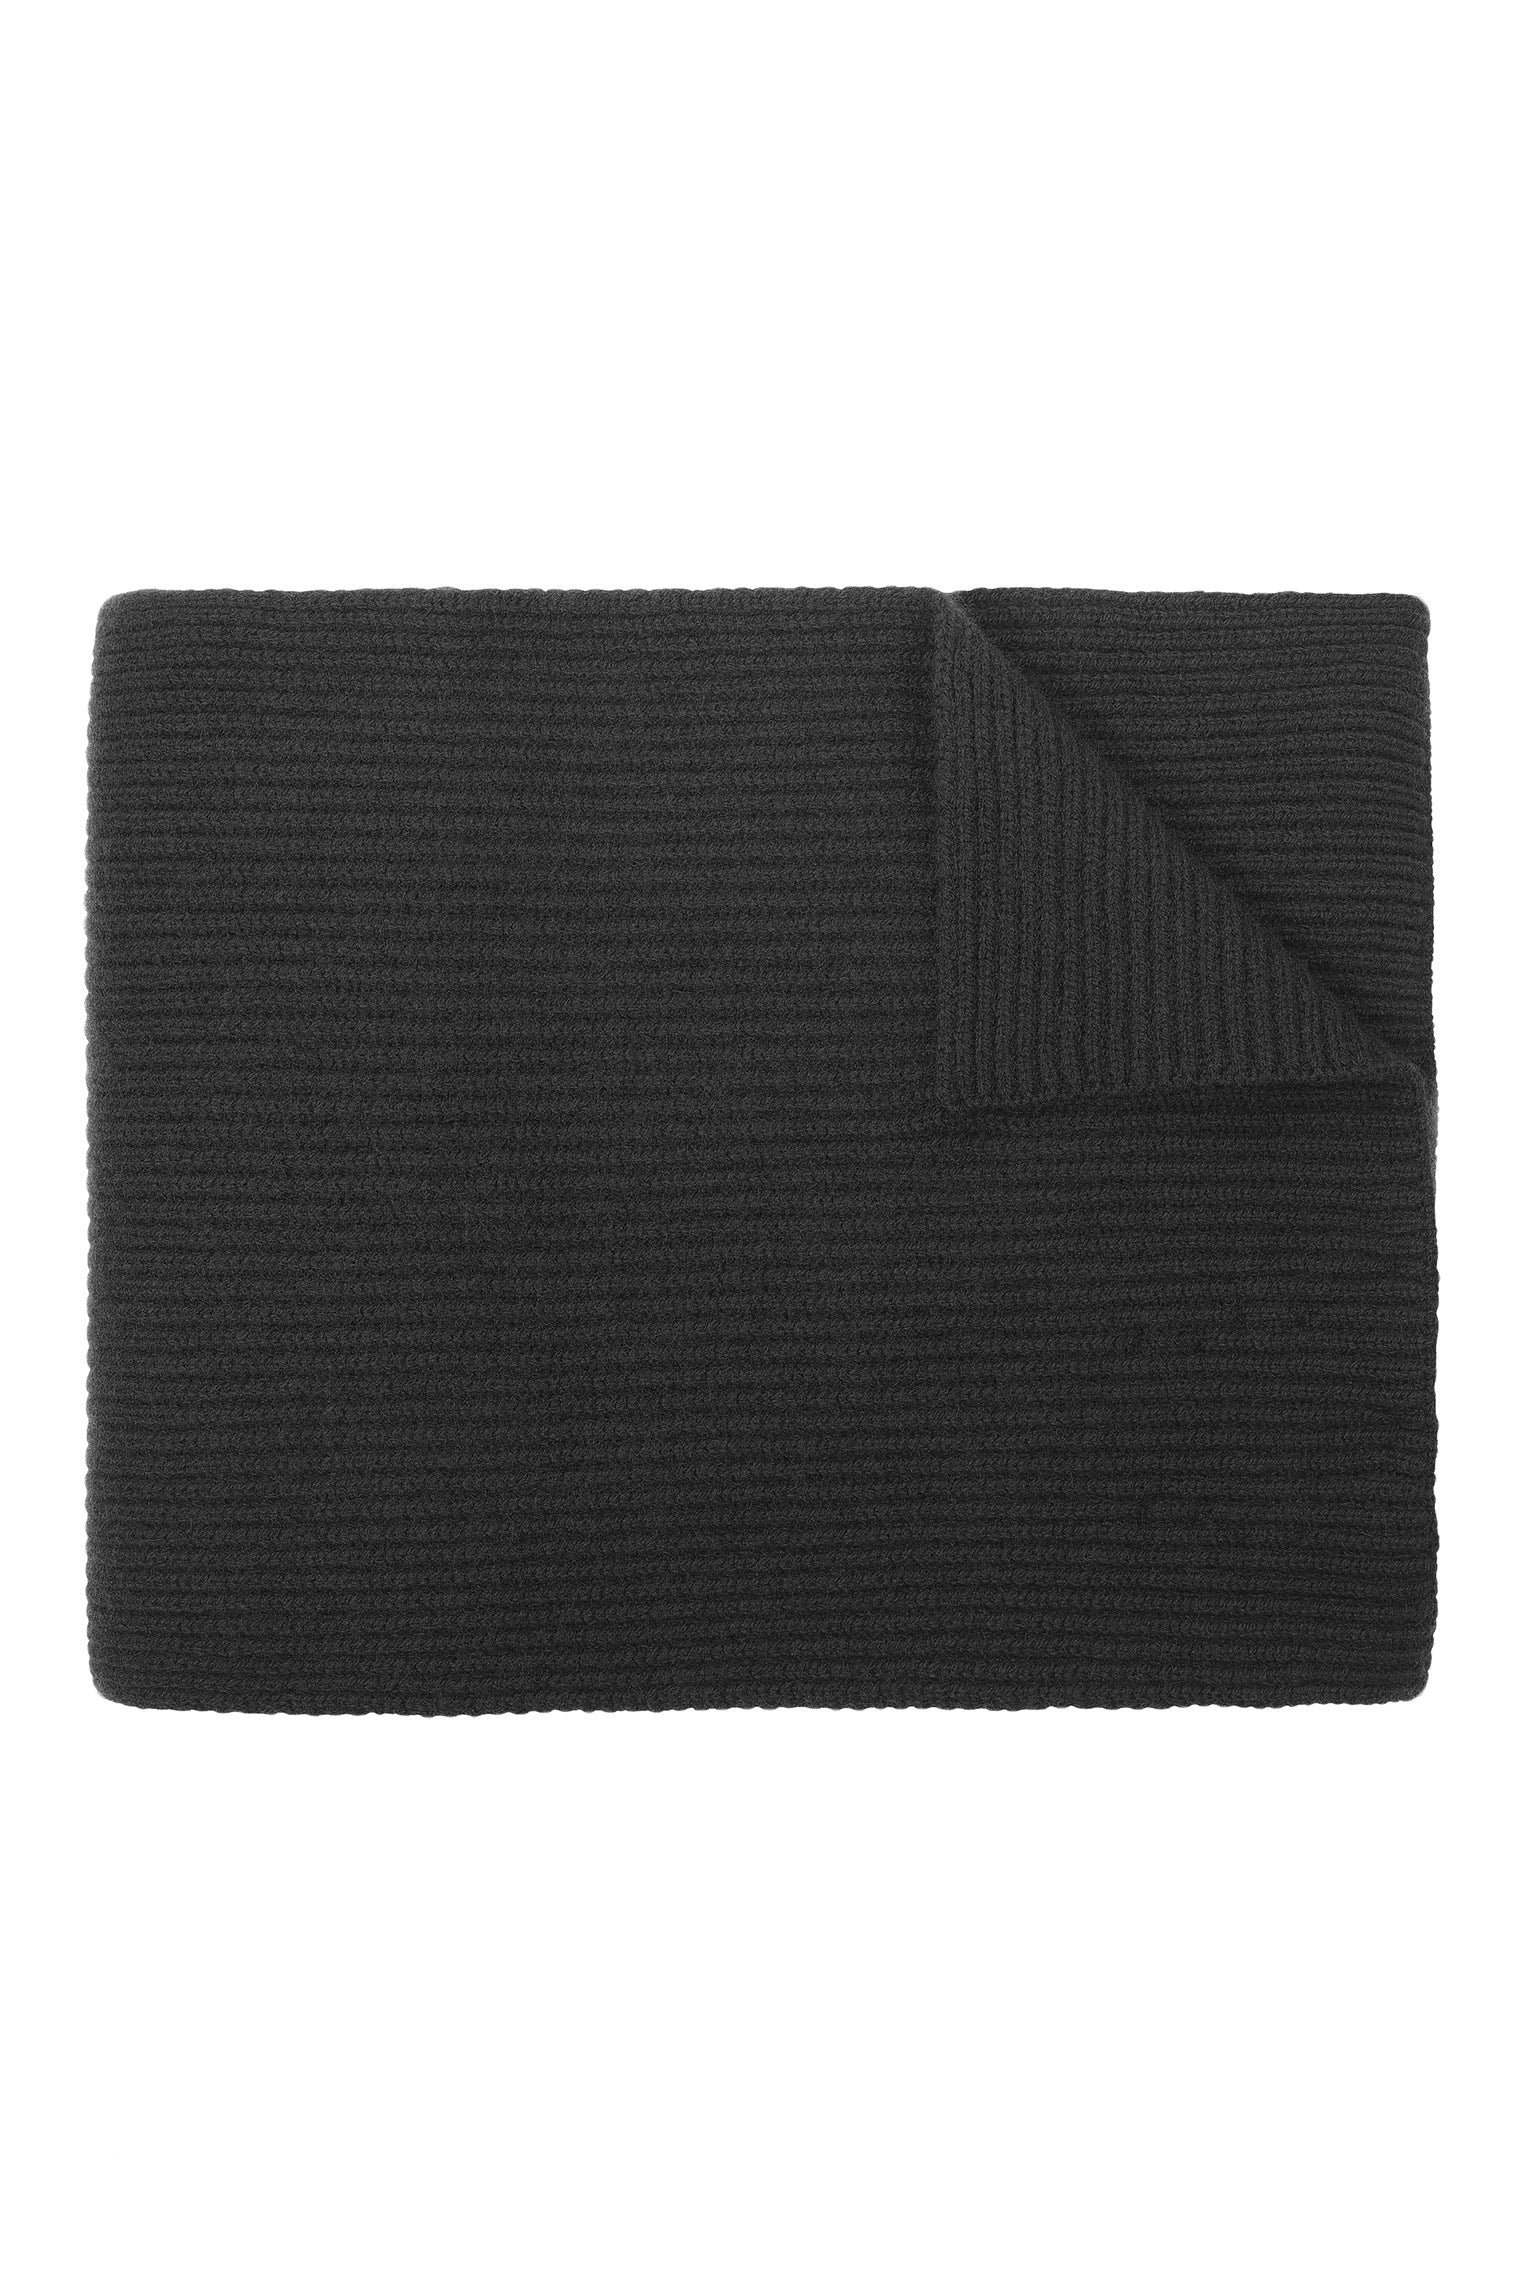 Cashmere Knitted Scarf - Men's Hats - Lock & Co. Hatters London UK